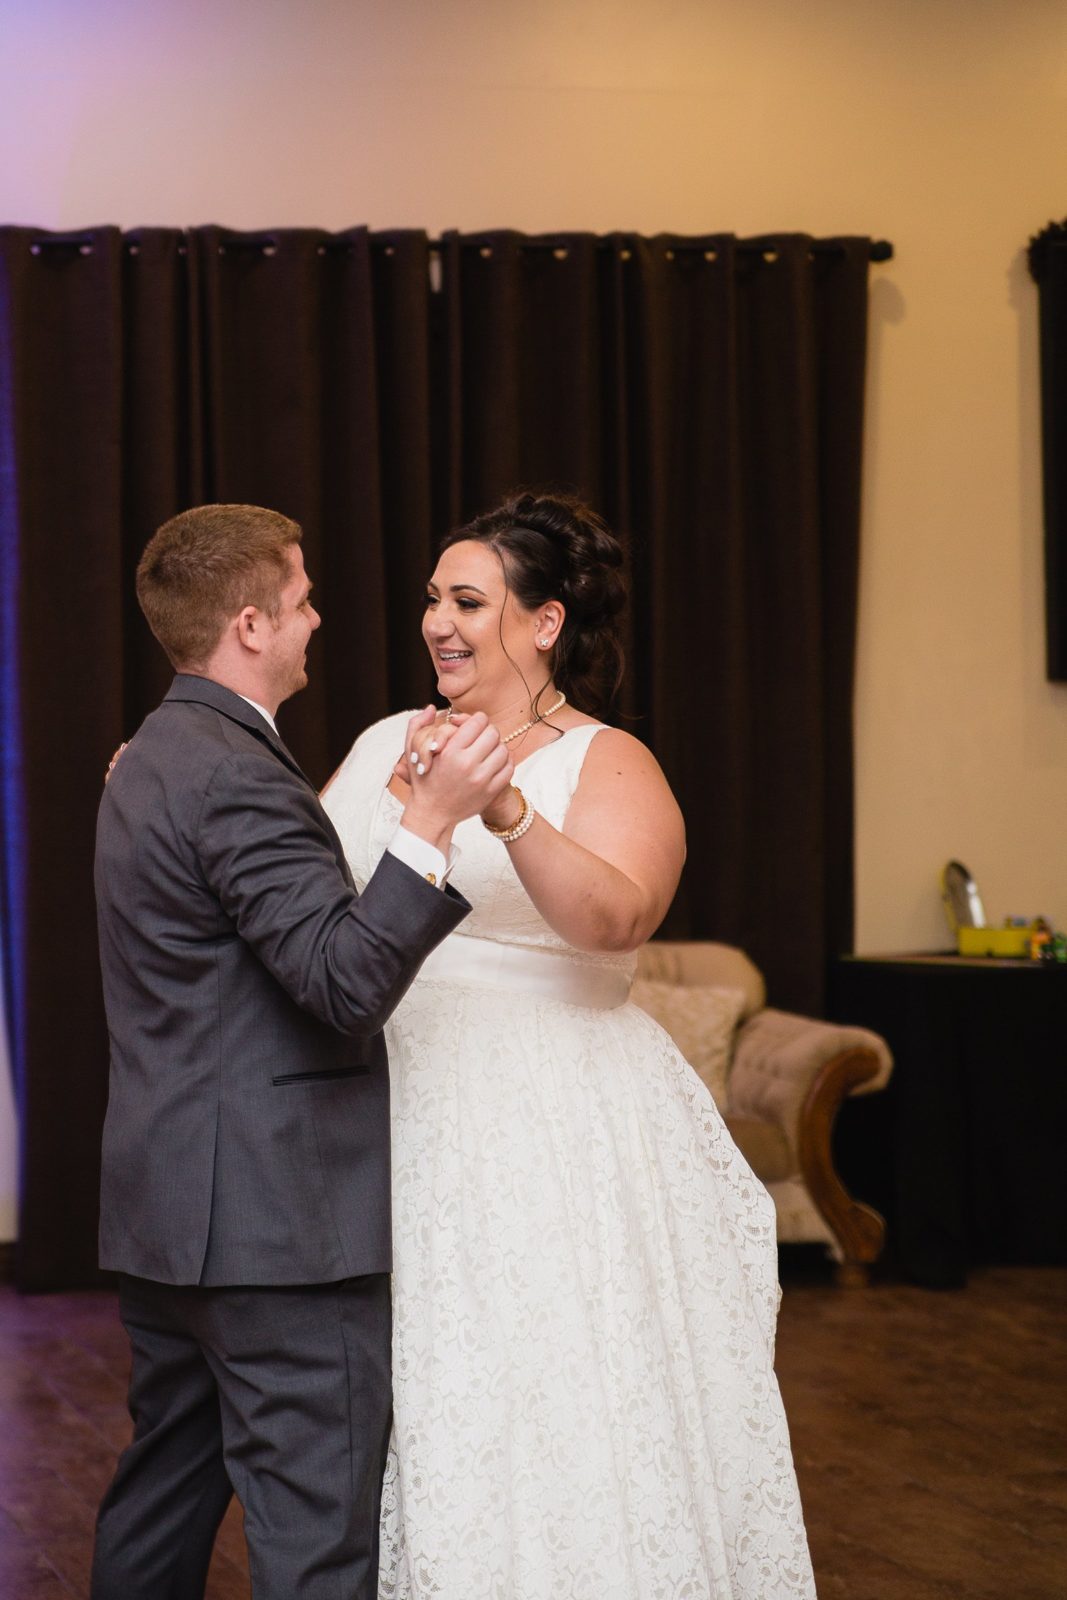 Bride and Groom sharing first dance at their Supserstition Manor wedding reception by Arizona wedding photographer PMA Photography.